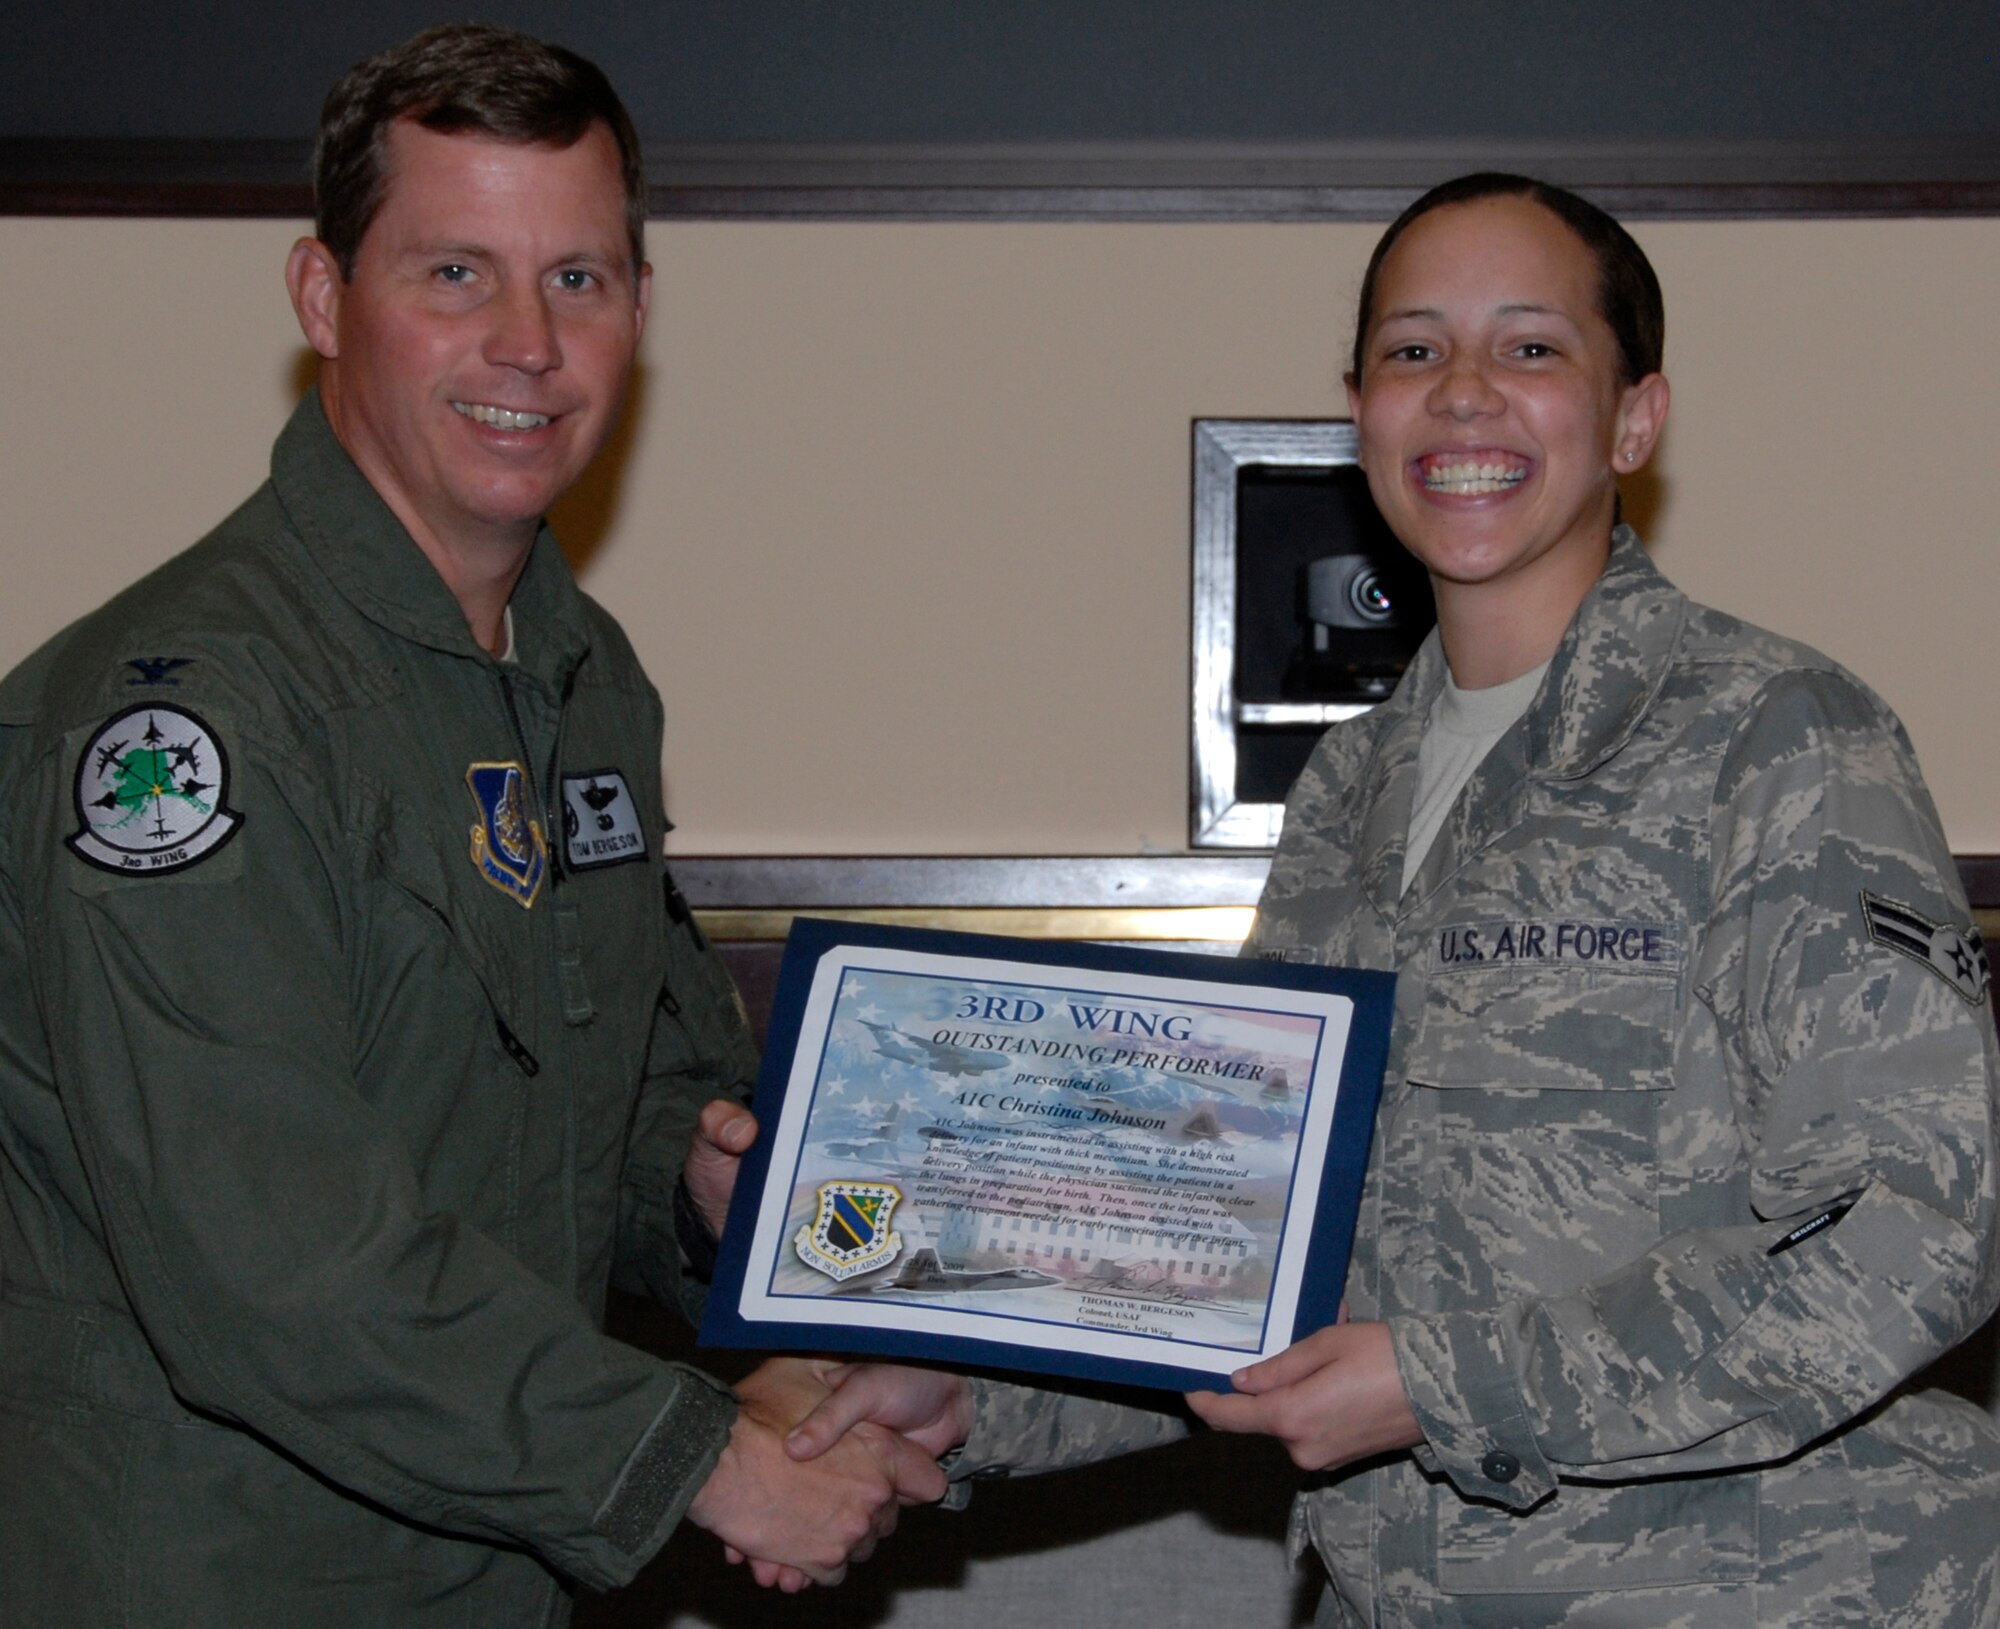 Airman 1st Class Christina Johnson, receives a 3rd Wing outstanding performer certificate from Col. Thomas Bergeson, 3rd Wing commander July 28. (U.S. Air Force photo/Senior Airman Cynthia Spalding)